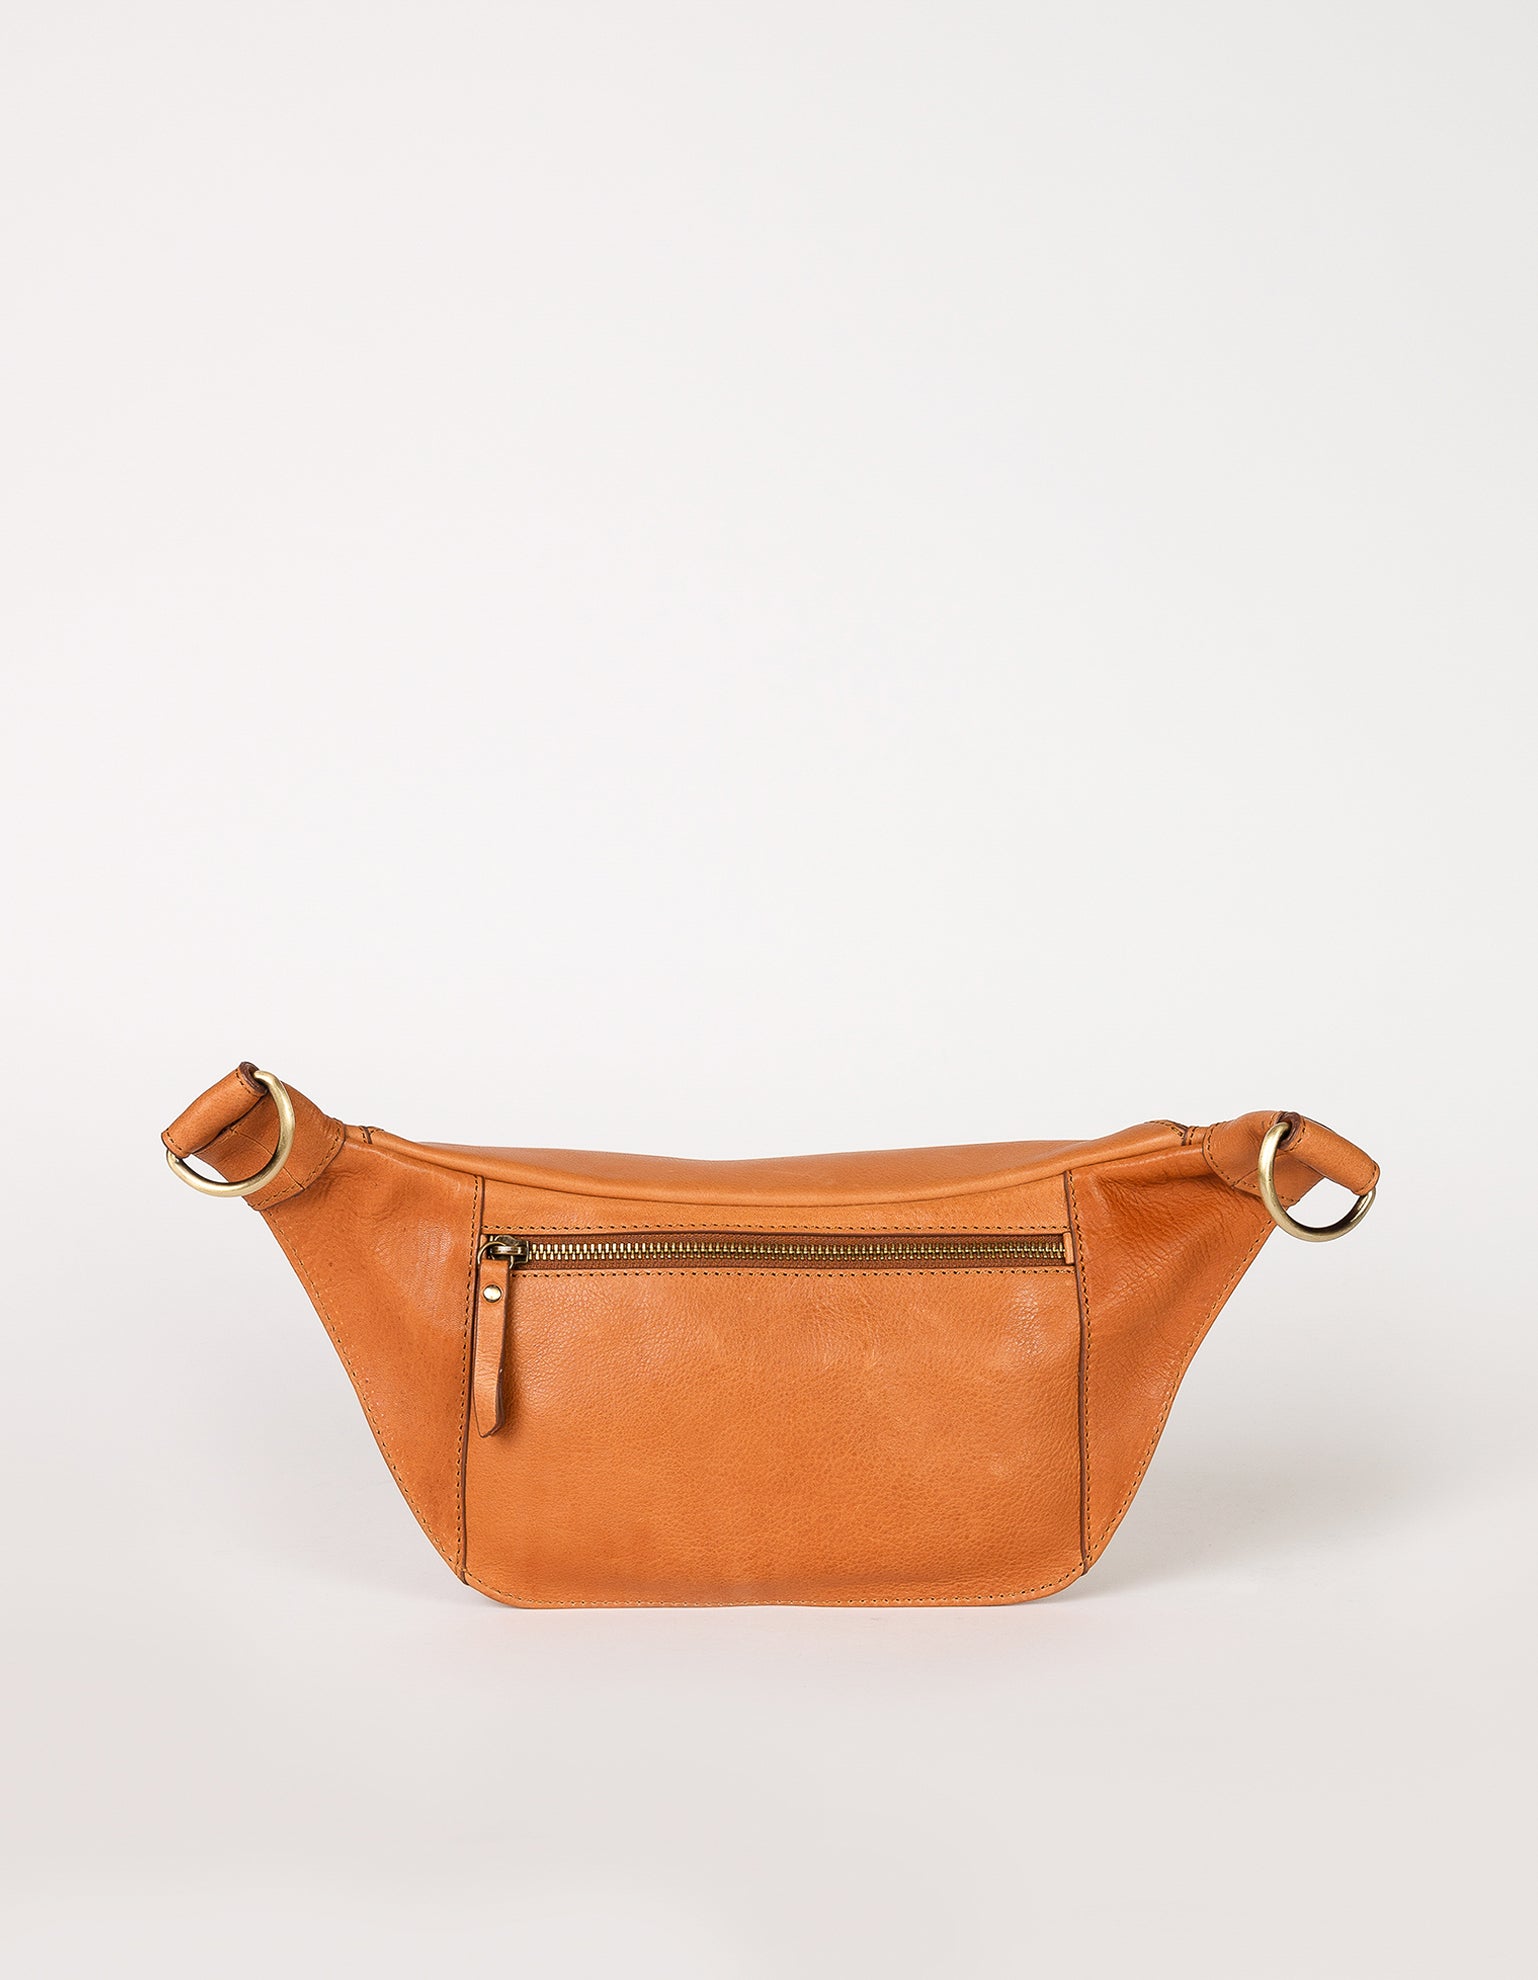 Drew Bum Bag in Wild Oak soft grain leather without strap. Back product image